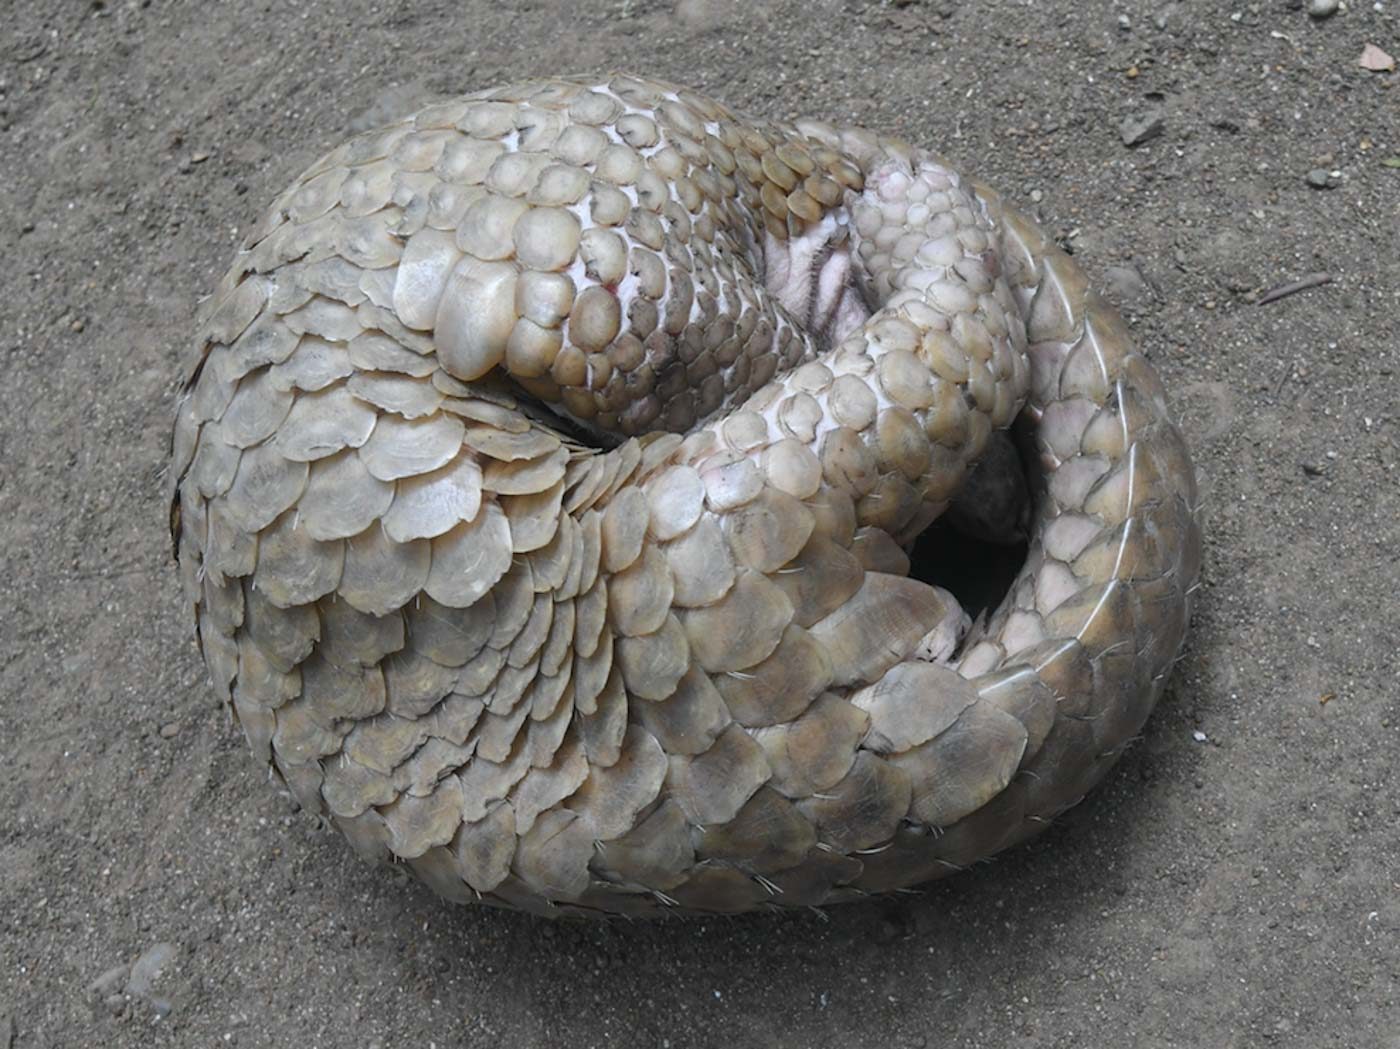 Philippine gov’t finds stopping pangolin trade challenging